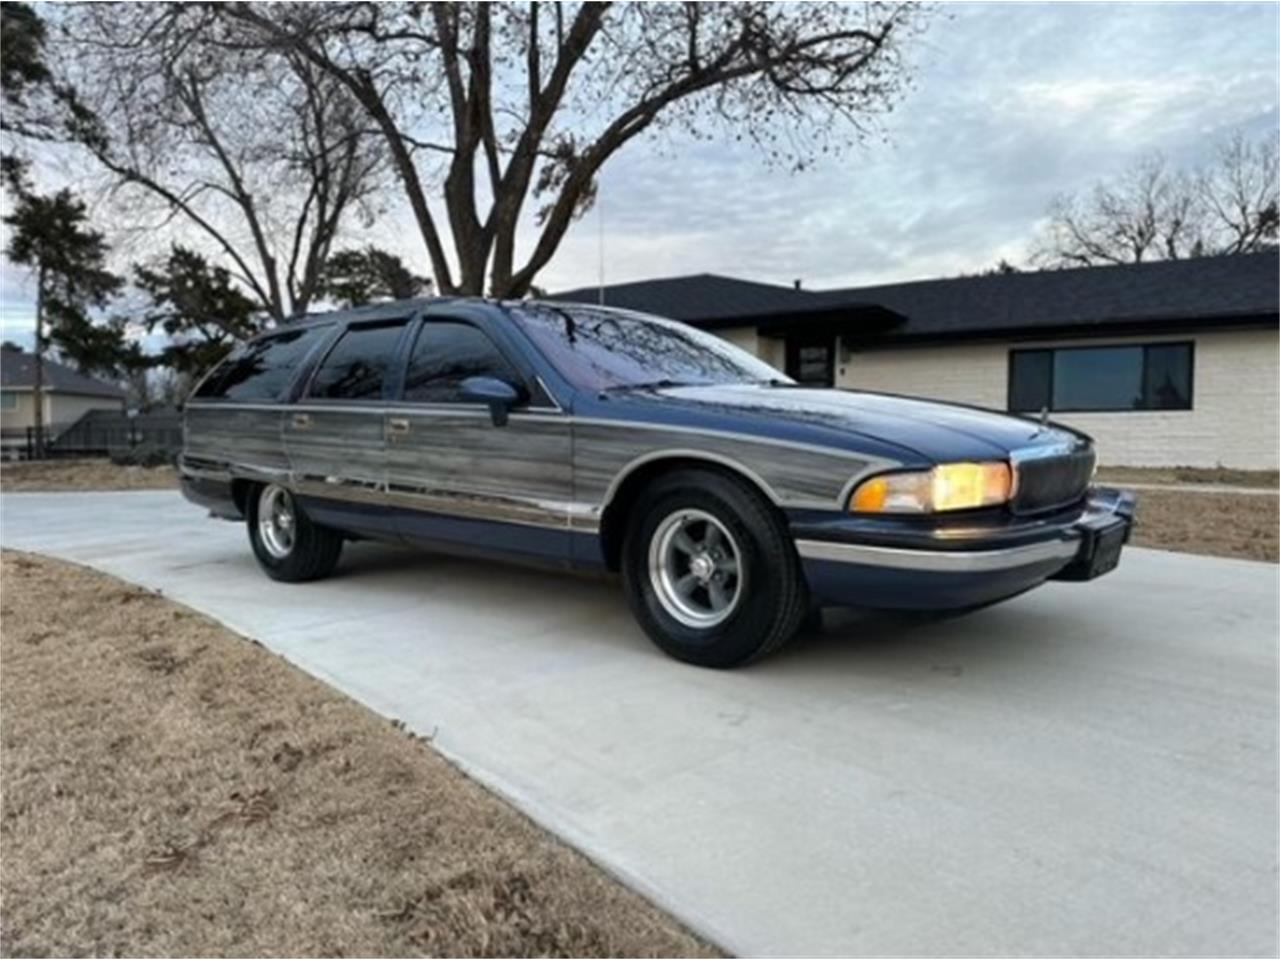 For Sale at Auction: 1994 Buick Roadmaster in Shawnee, Oklahoma for sale in Shawnee, OK